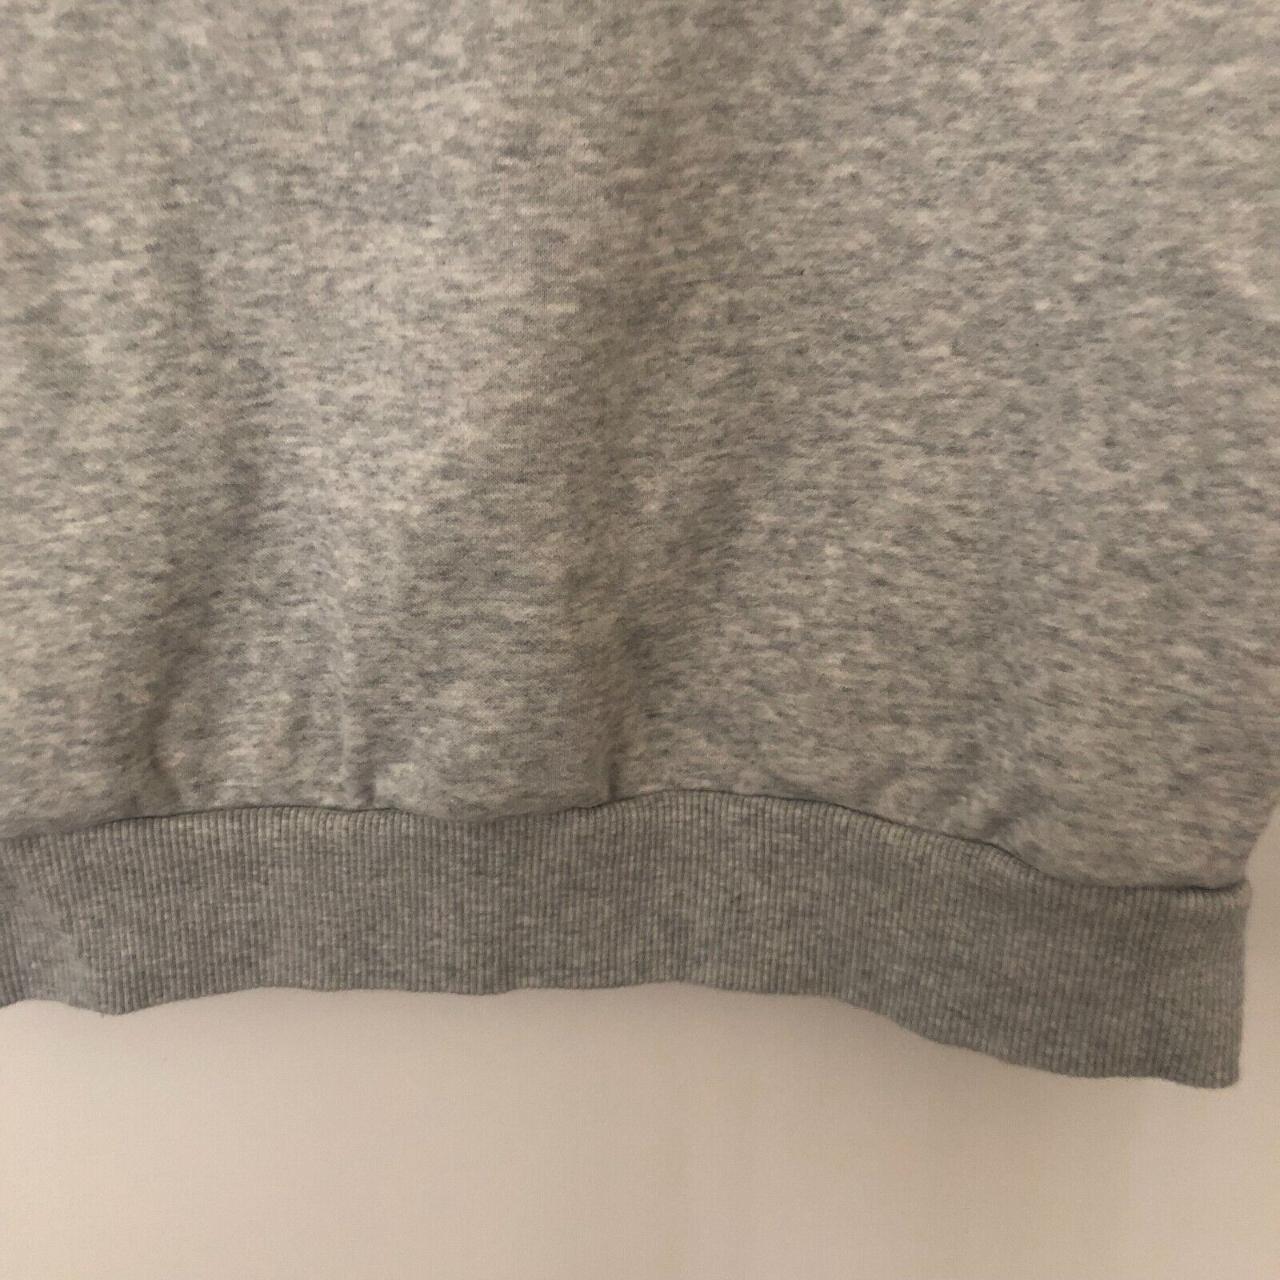 puma jumper pull over grey size extra small Over... - Depop